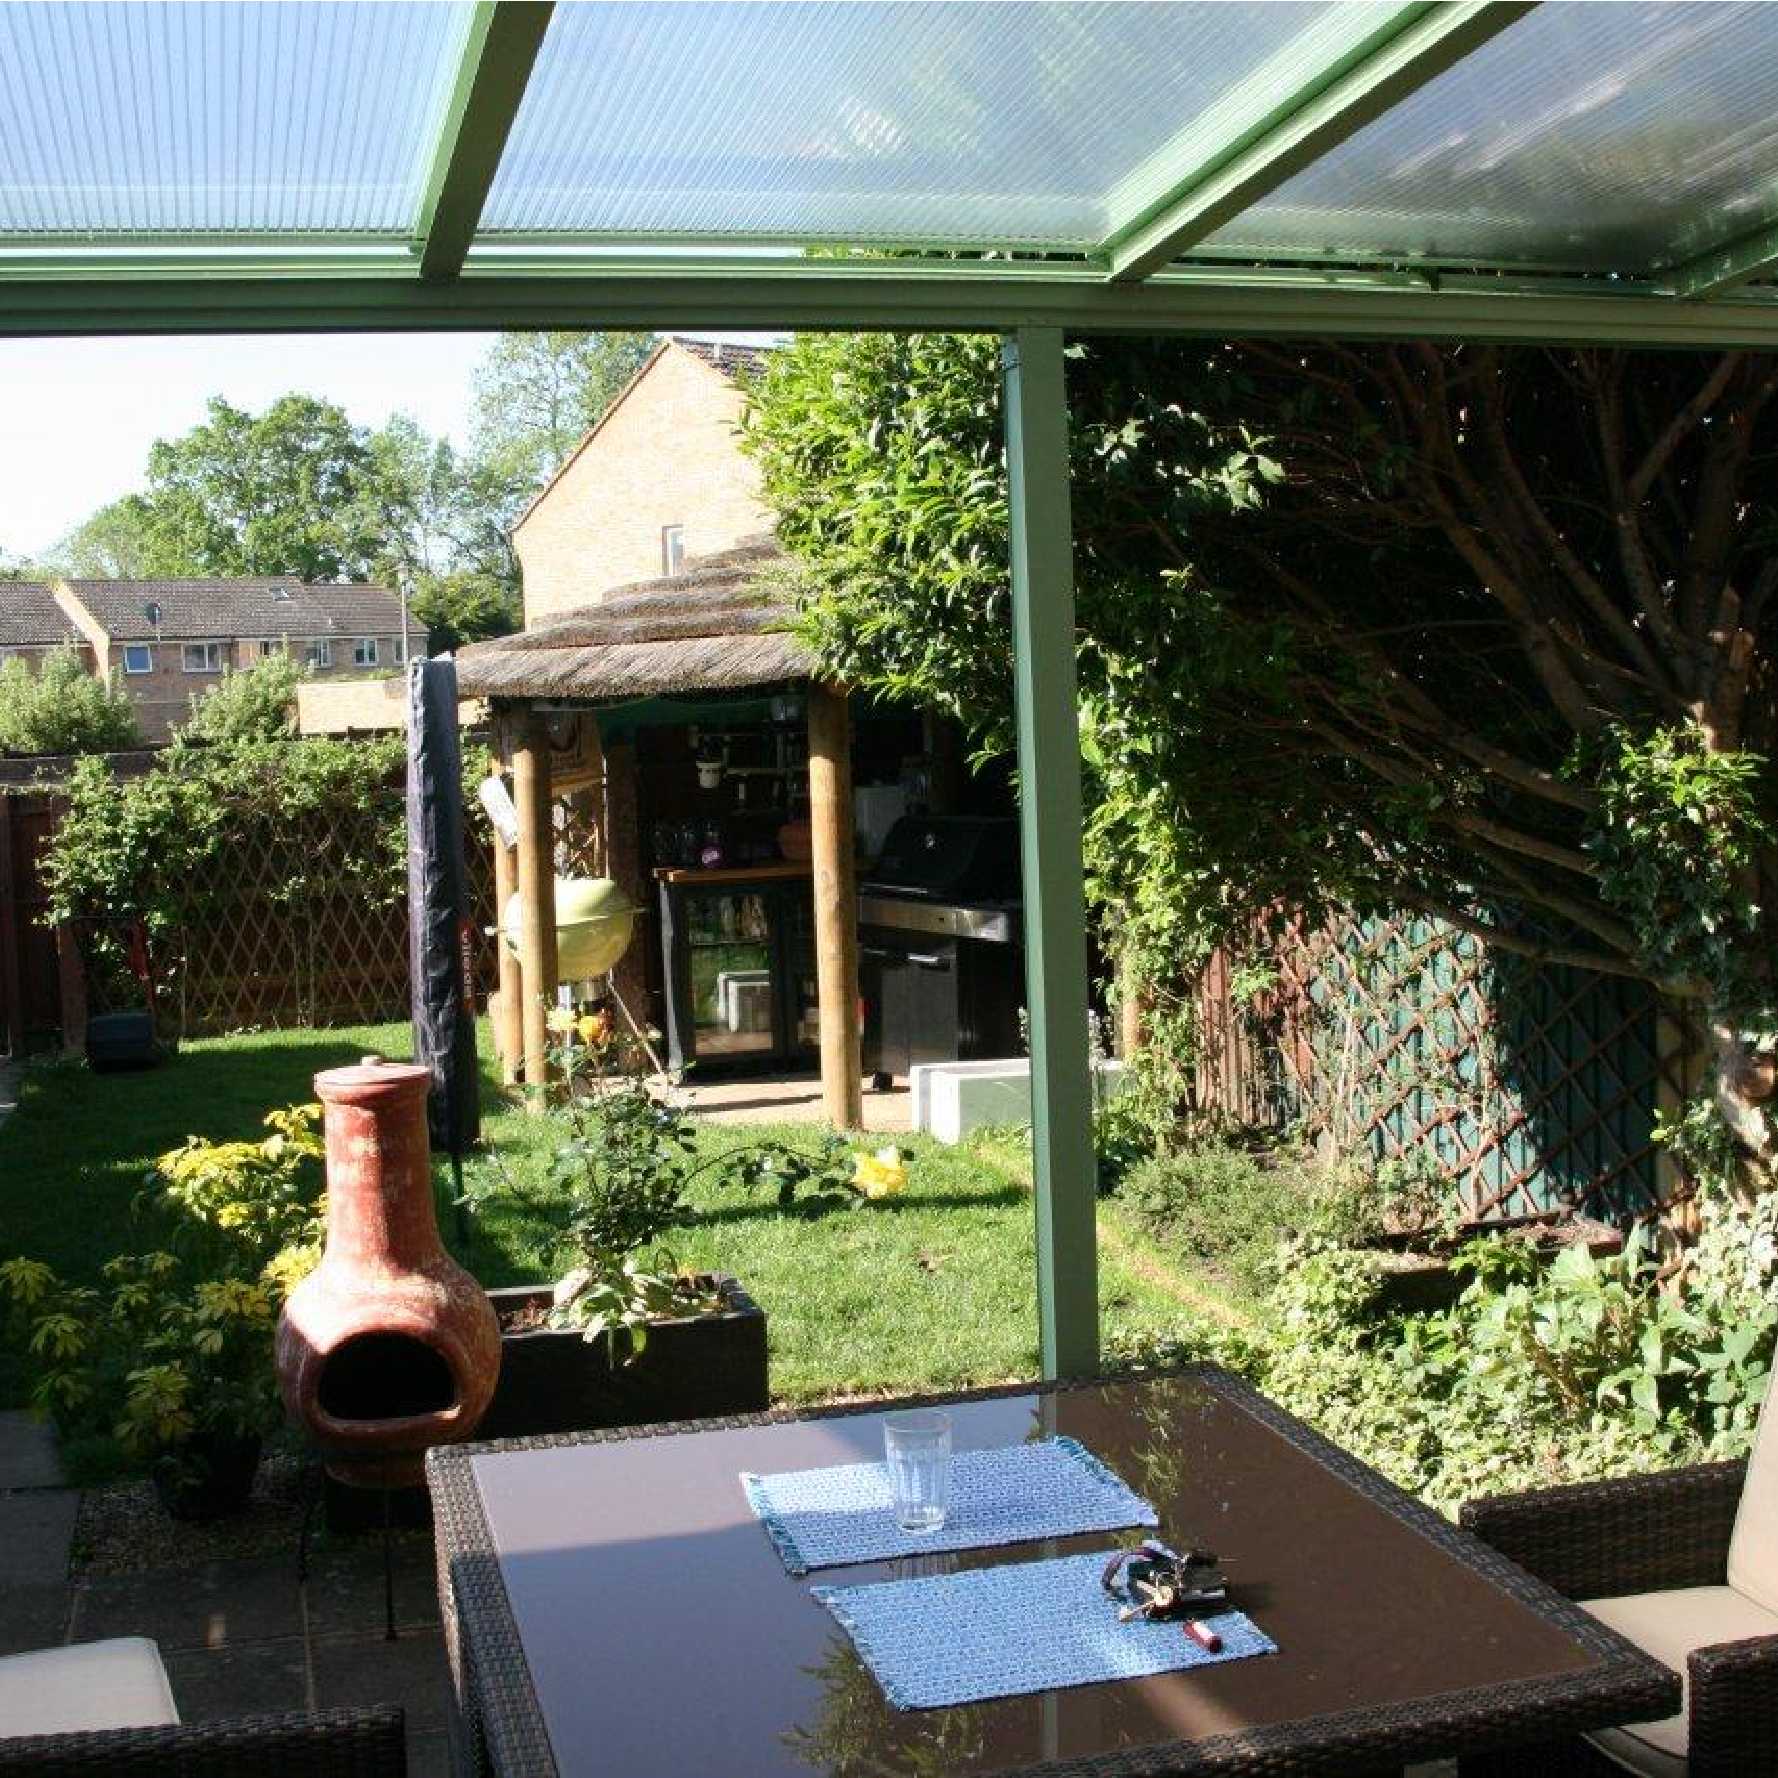 Affordable Omega Smart Lean-To Canopy, White with 16mm Polycarbonate Glazing - 6.0m (W) x 3.5m (P), (3) Supporting Posts